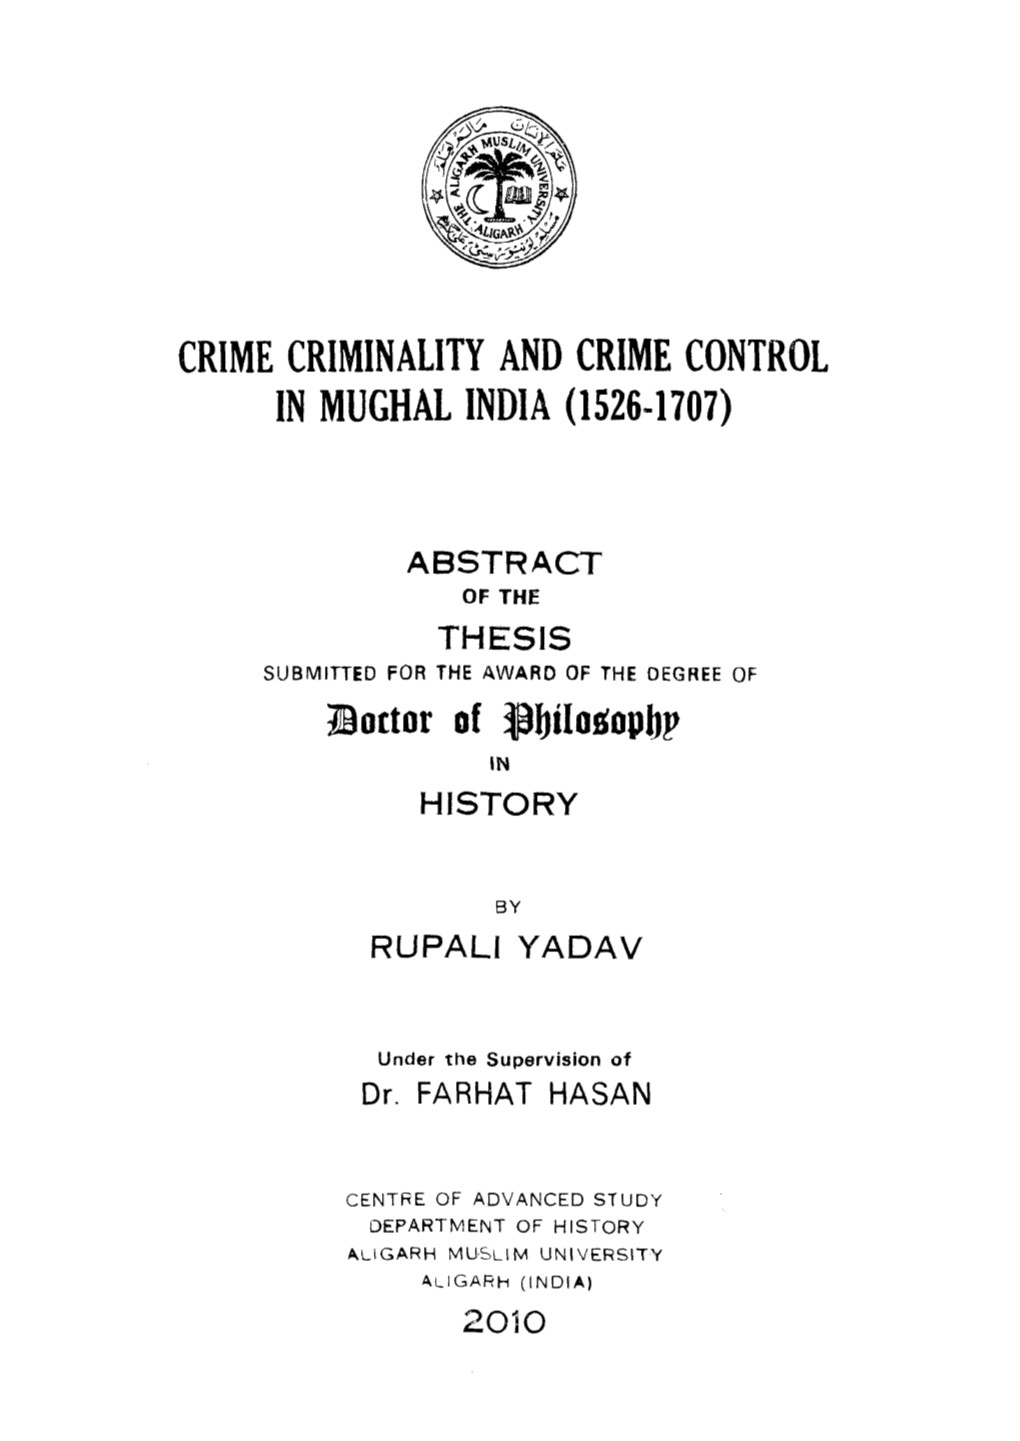 Crime Criminality and Crime Control in Mughal India (1526-1707)